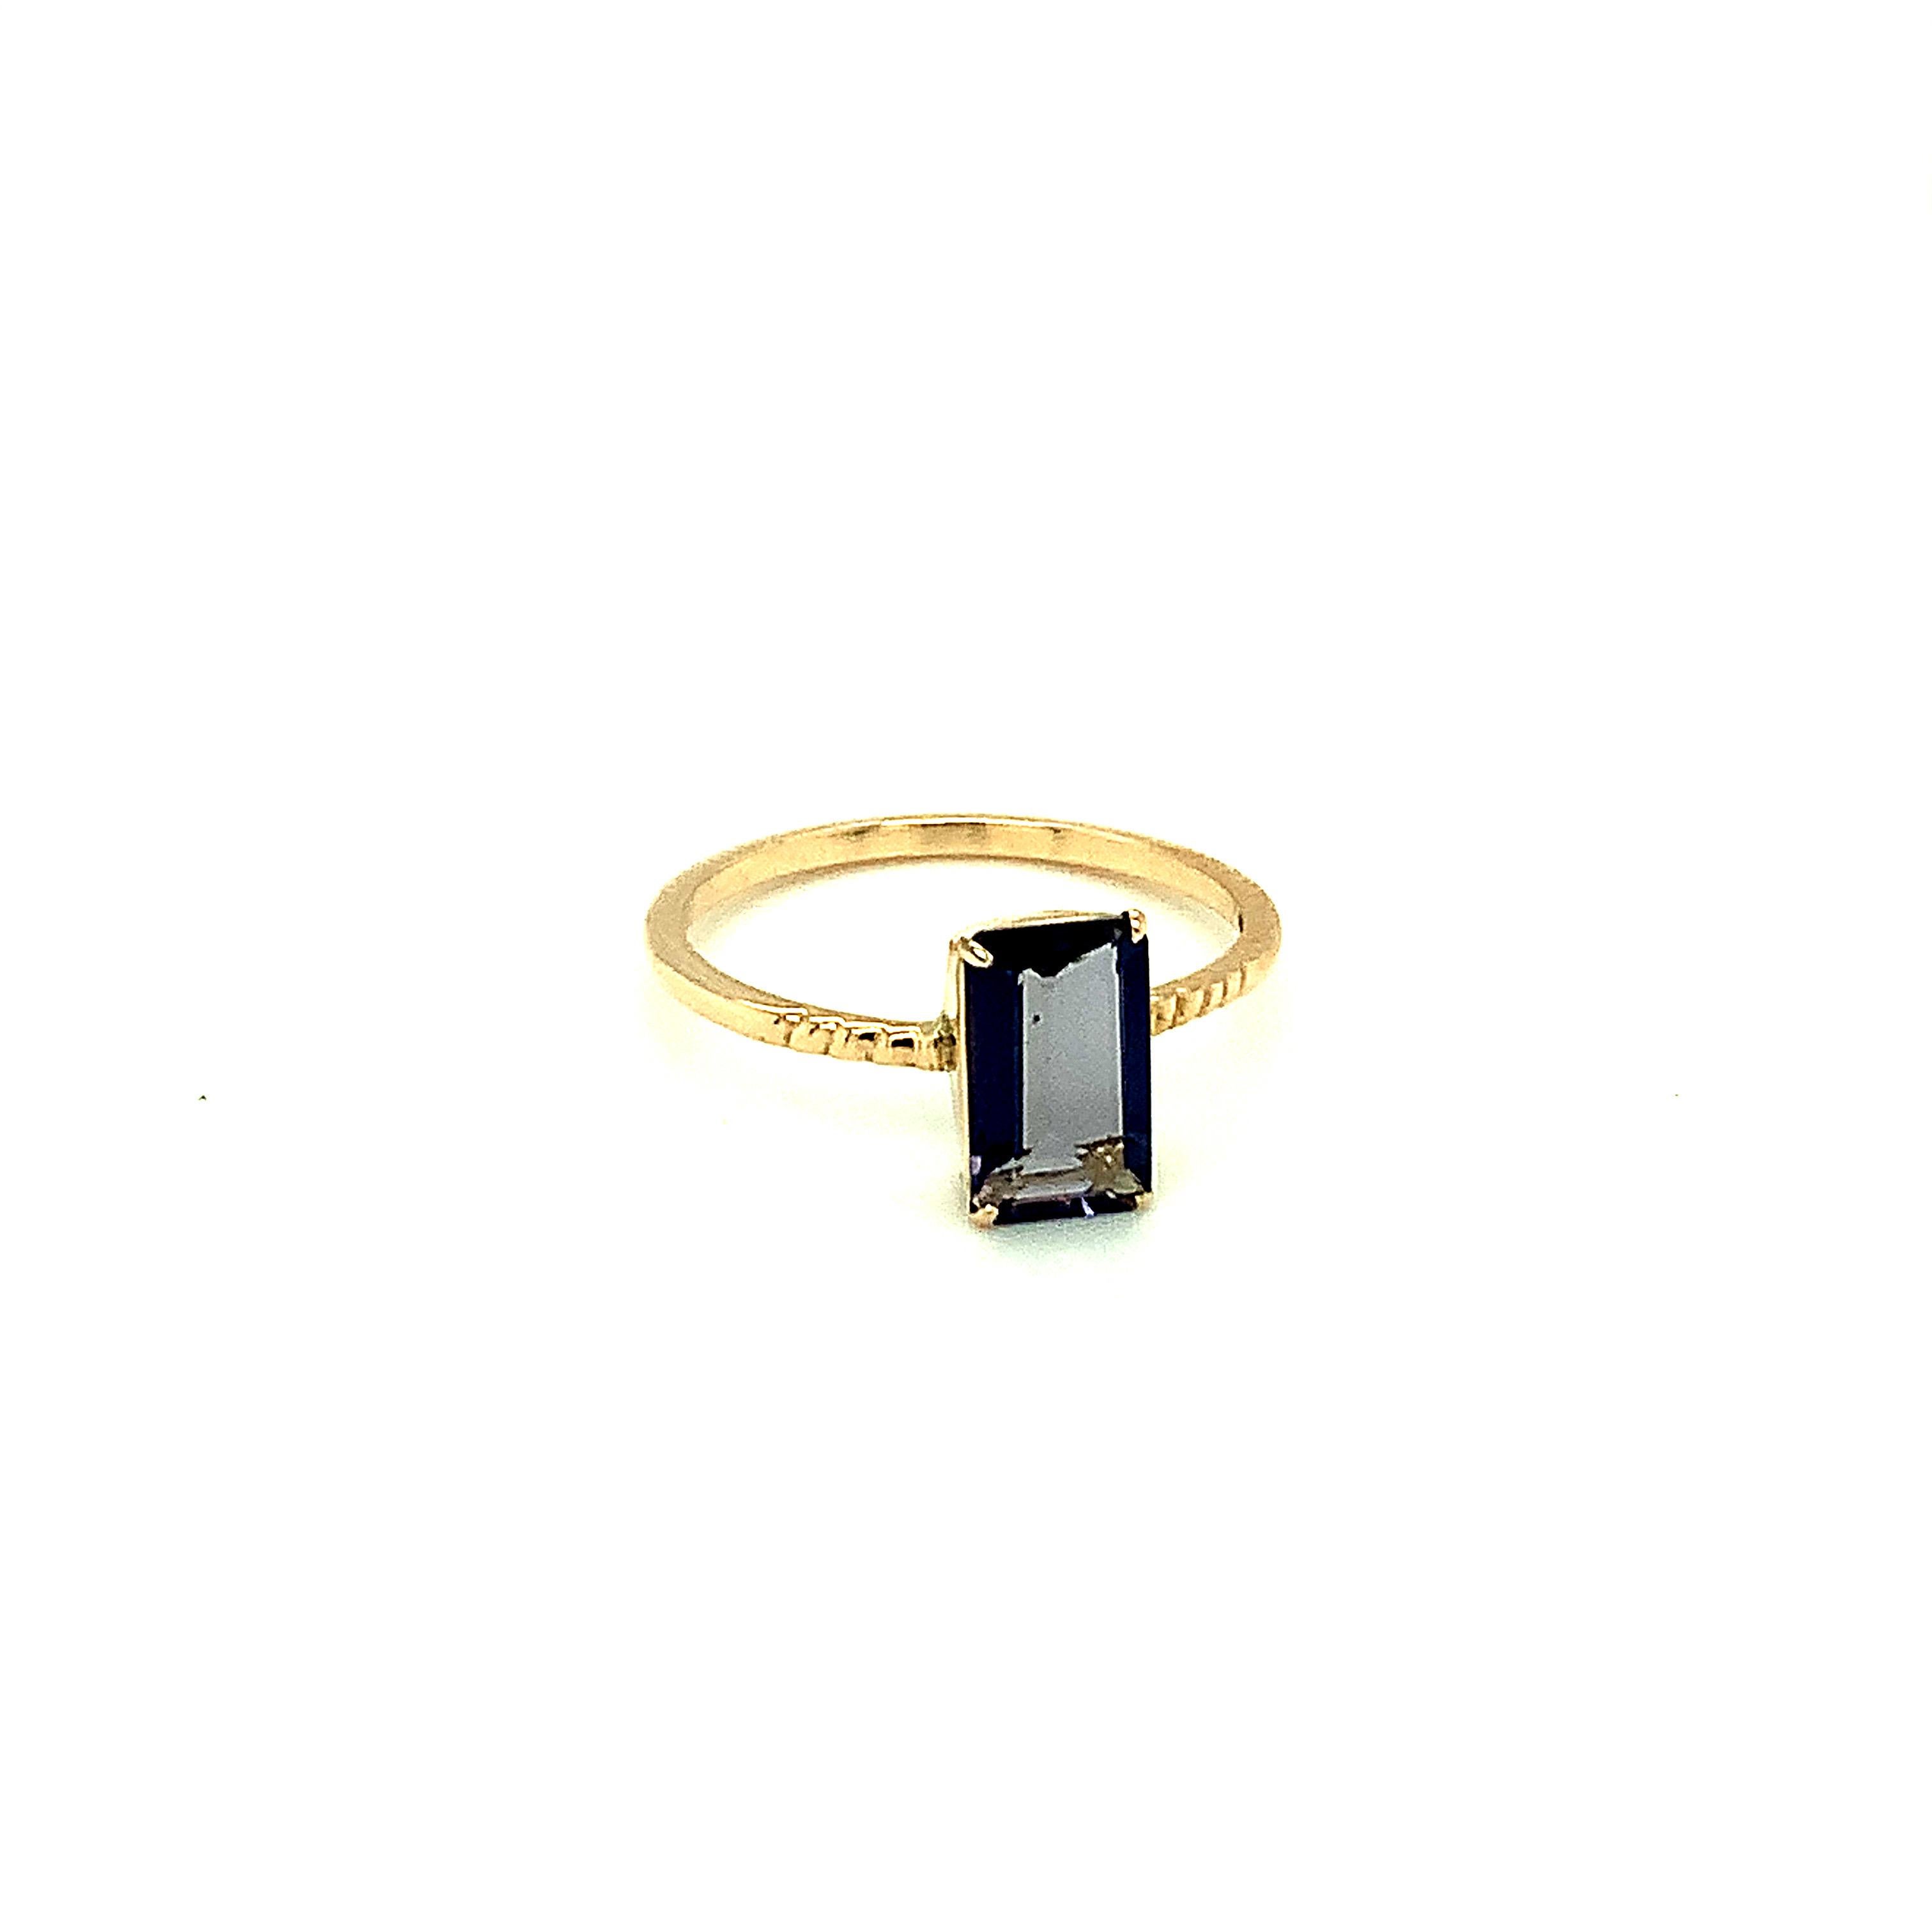 Hand cut and polished natural Iolite is crafted with hand in 14K yellow gold. 
Ideal for daily casual wear.
Image is enlarged to get a closer view.
Ethically sourced natural gem stone.